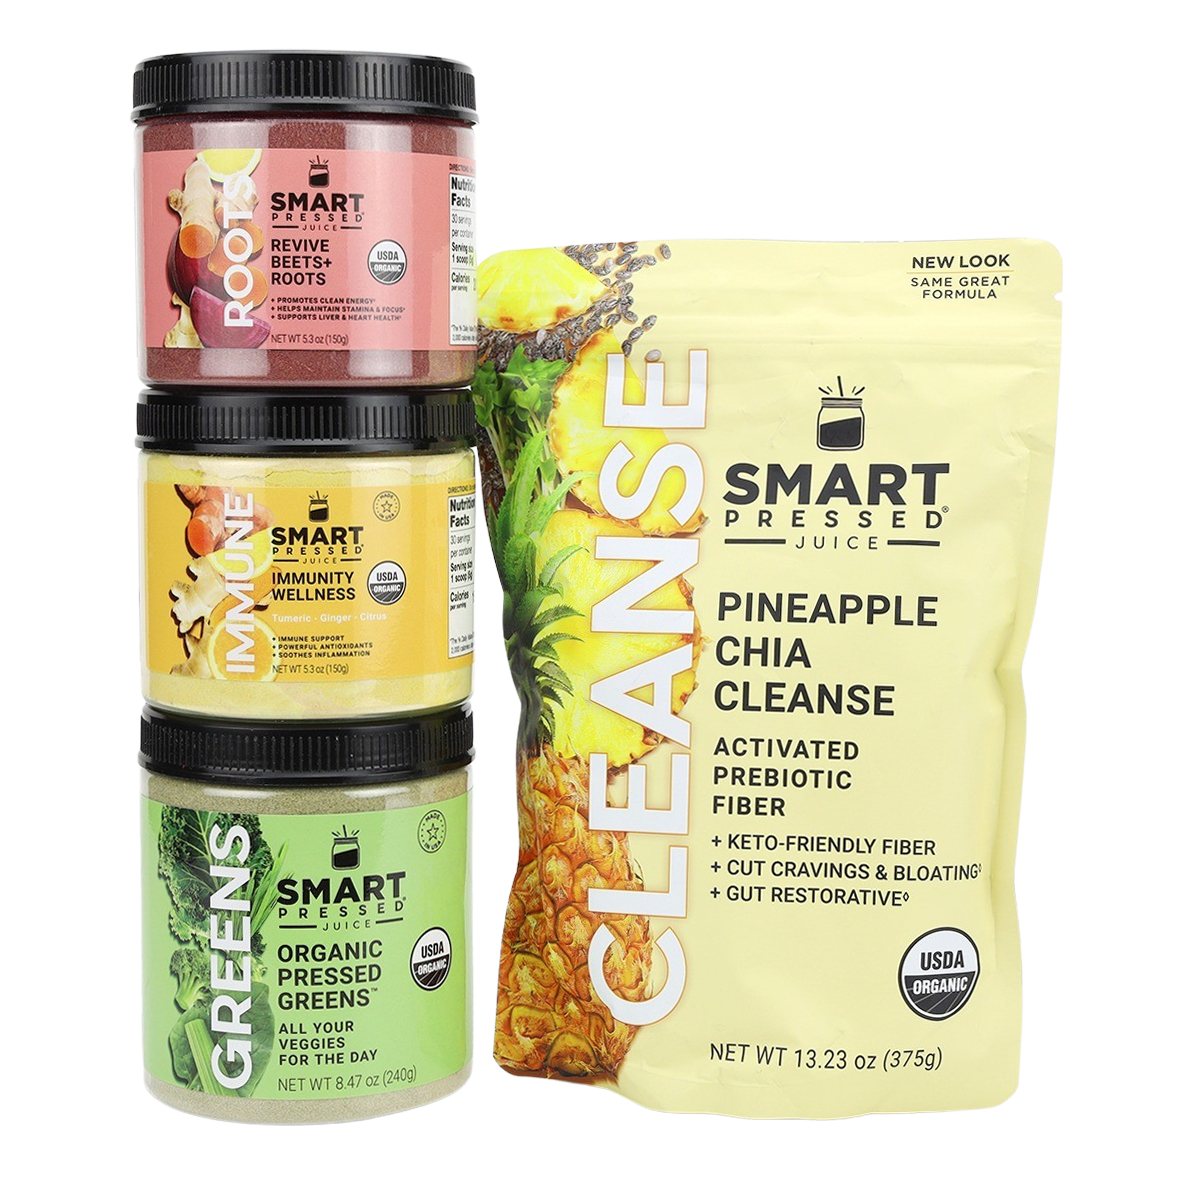 One jar of 150 grams Revive Beet+Roots stack on one jar of 150 grams of Immunity Wellness stacked on one jar of 240 grams Organic Pressed Greens and one gusset bag of 375 grams Pineapple Chia Cleanse against a white background